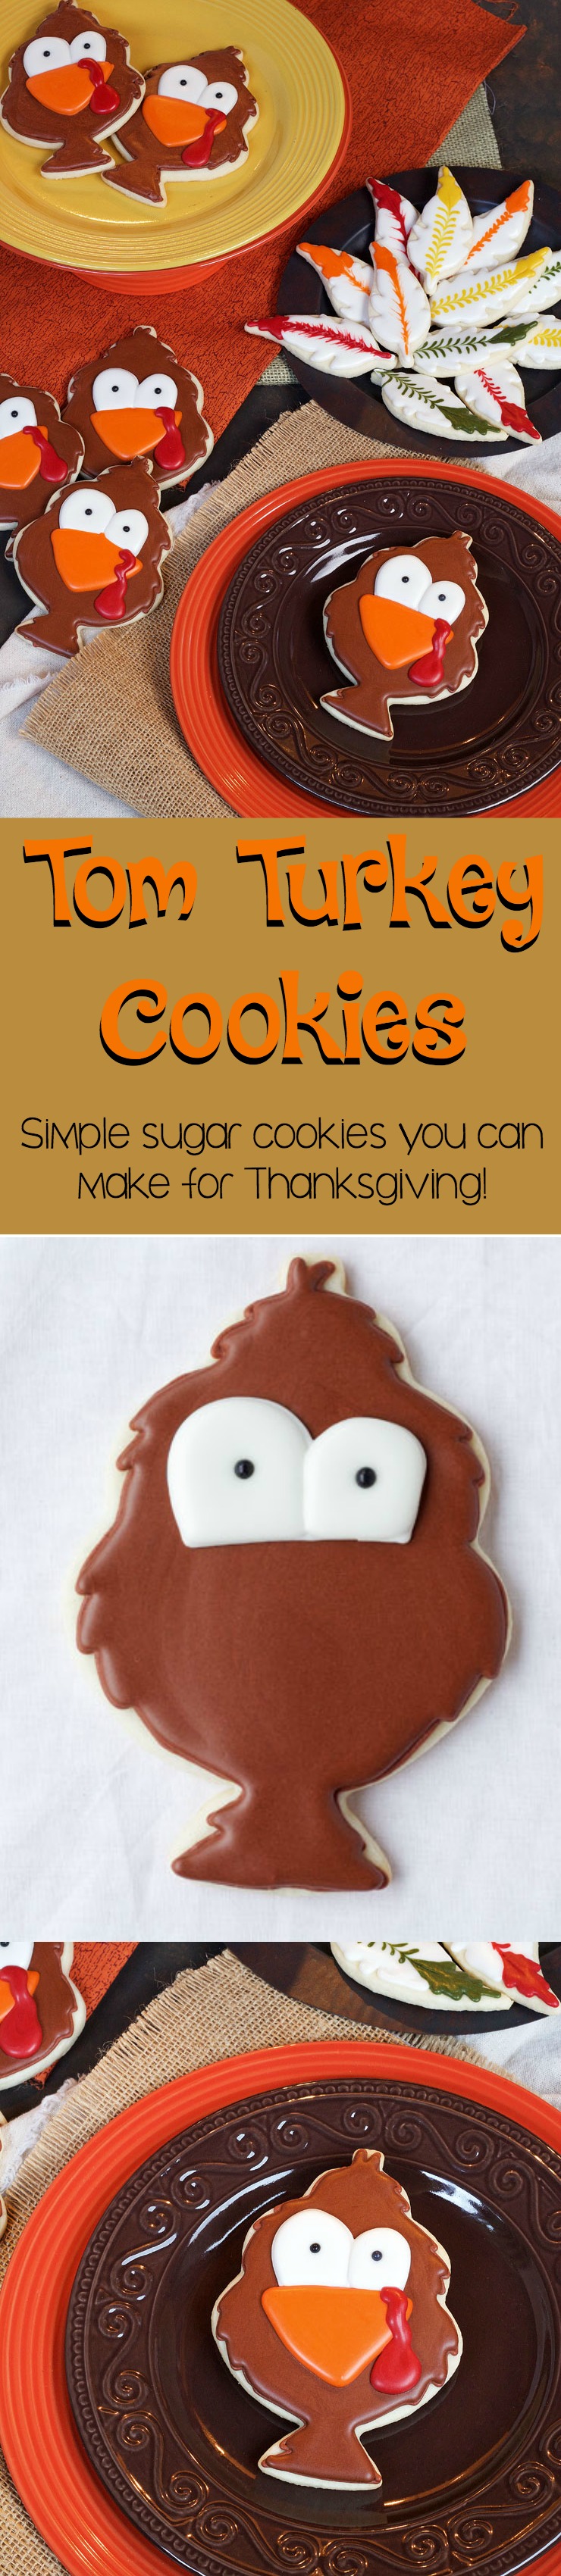 Tom Turkey Cookies for Thanksgiving | The Bearfoot Baker